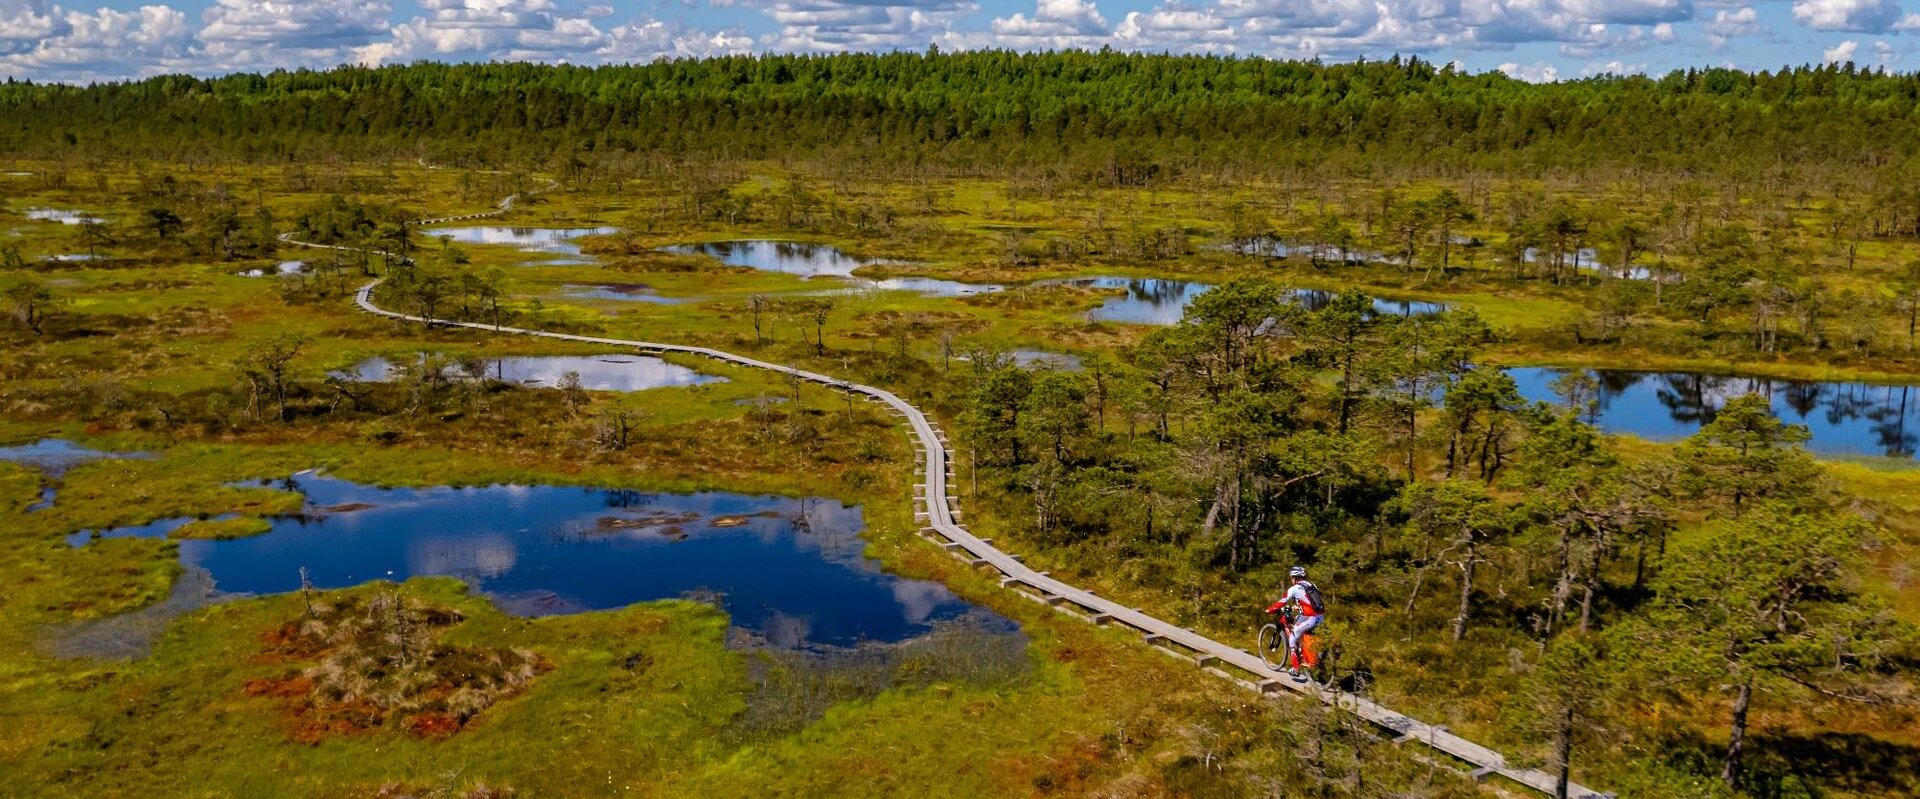 This bog is one of the largest bogs in Kõrvemaa: about 1,000 hectares. The picturesque high bog with many bog pools is made unique thanks to the fact 